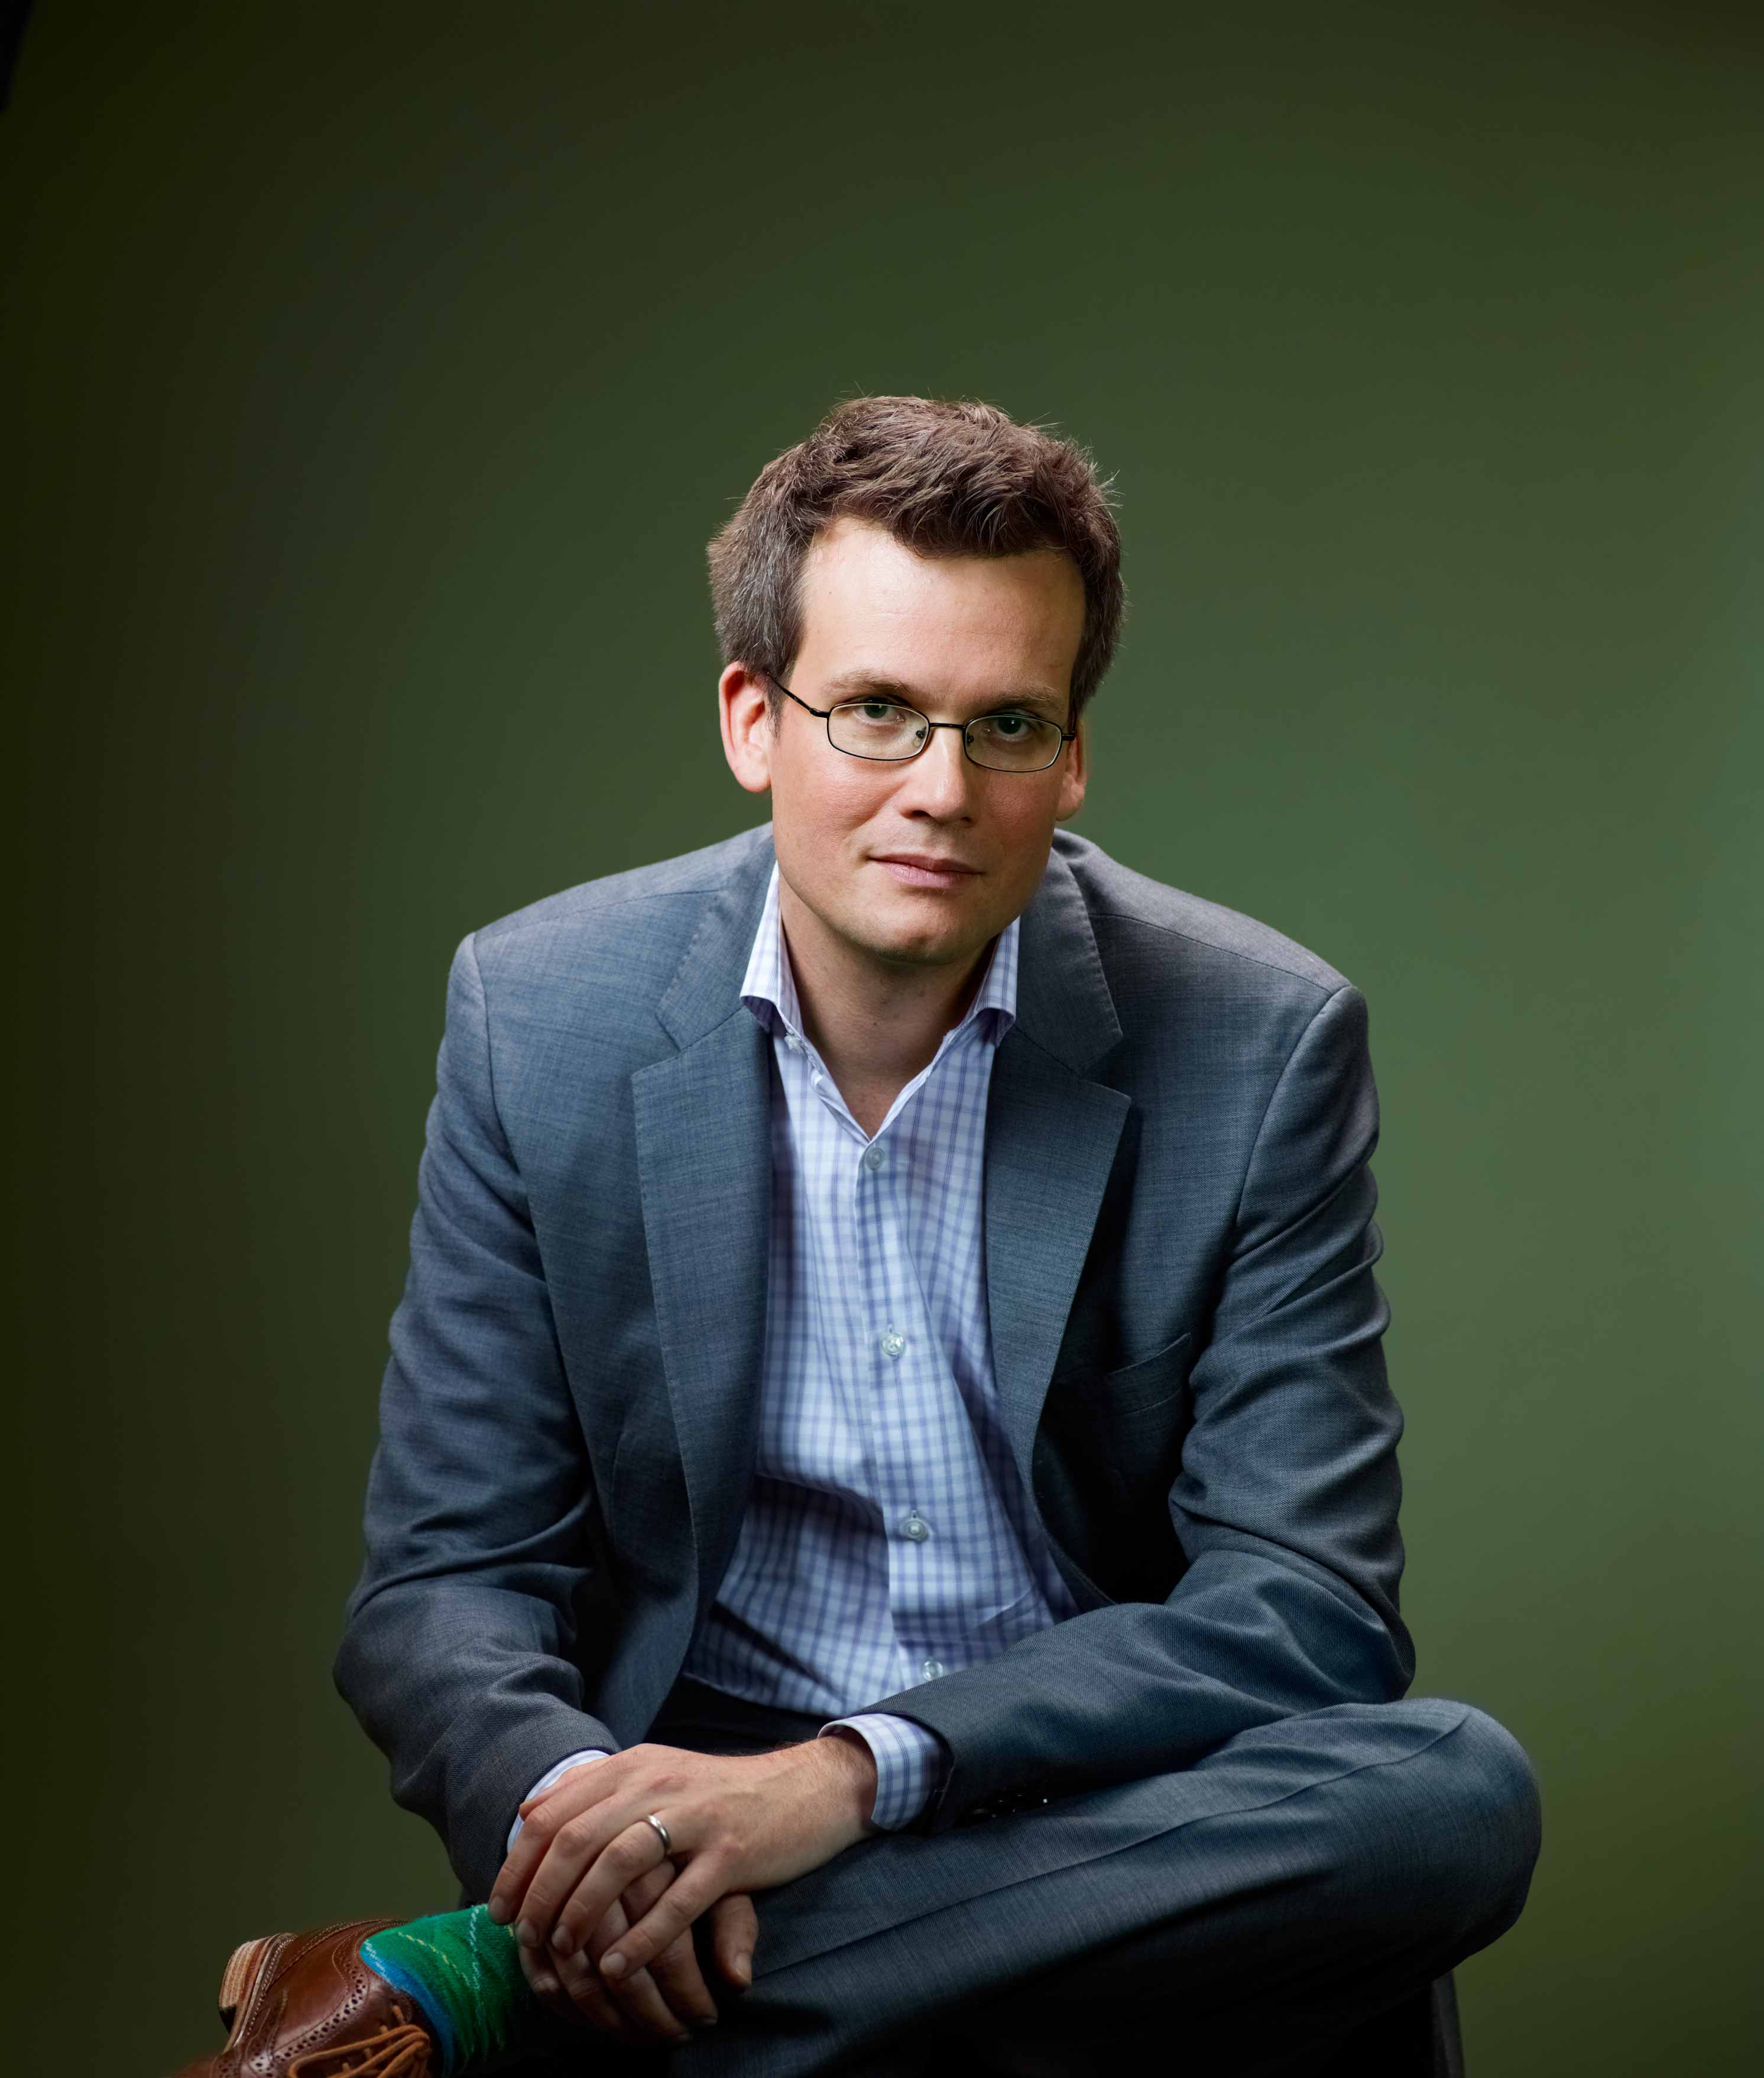 John Green Portrait The Fault in Our Stars